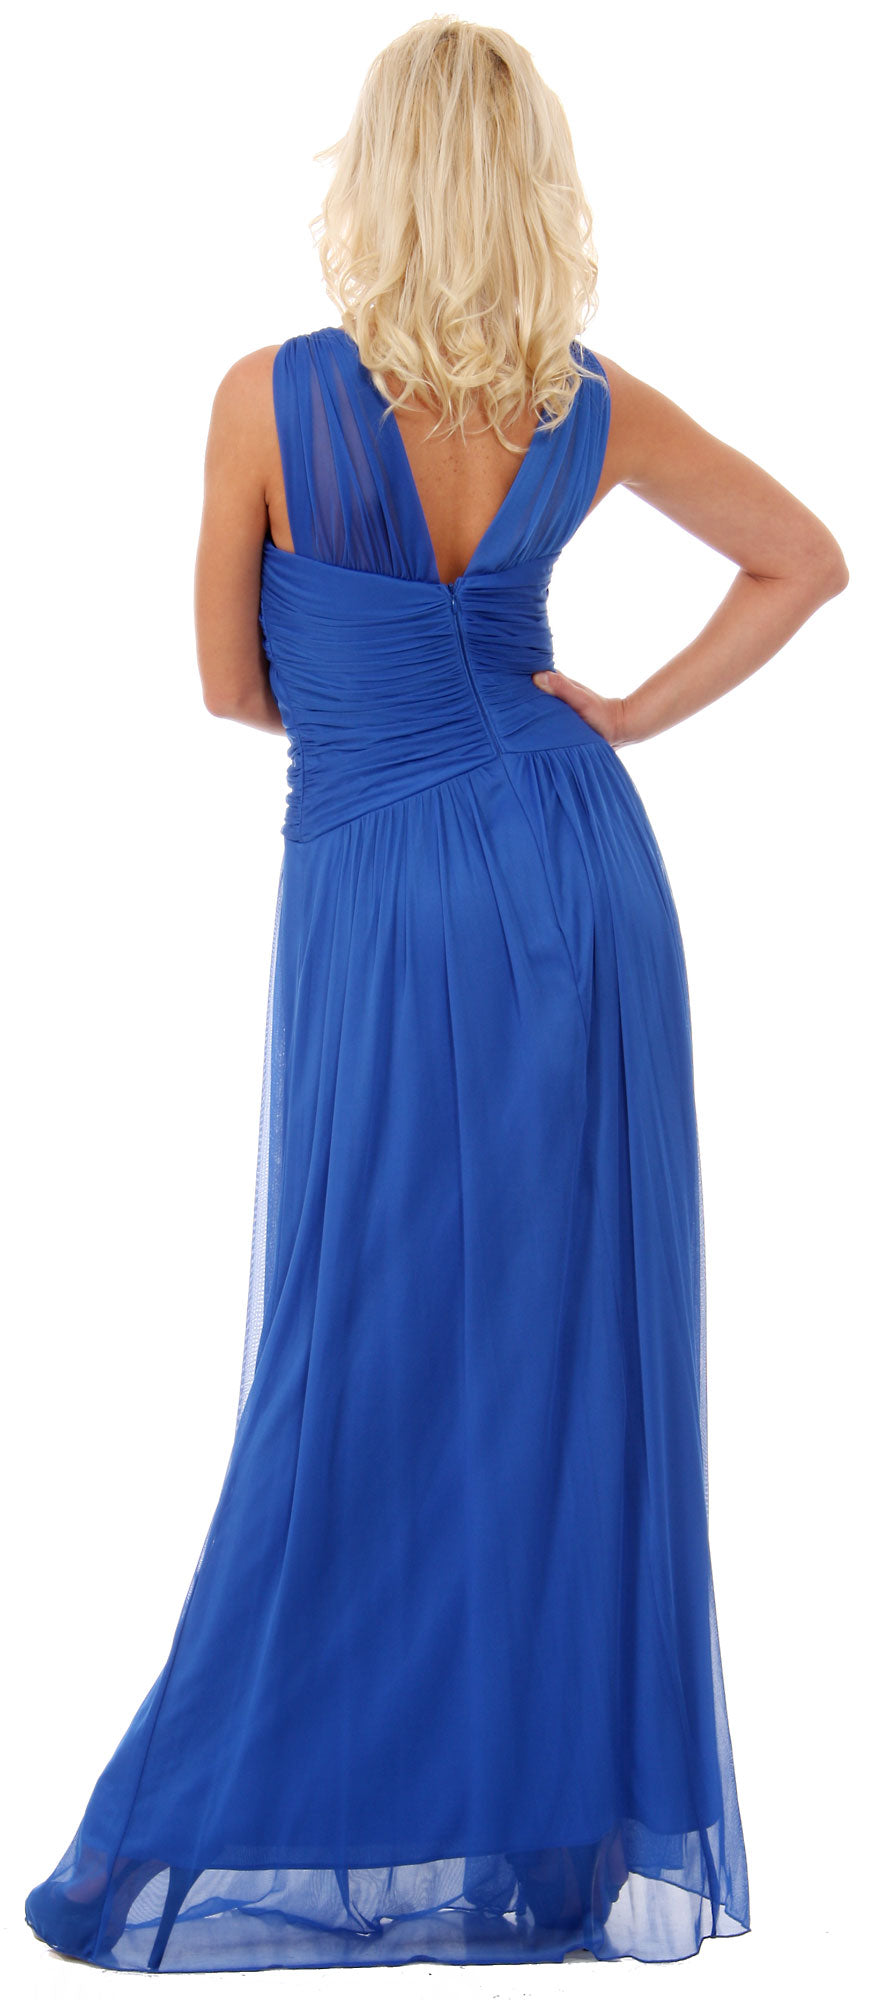 Back image of Ruched Bodice Long Formal Bridesmaid Evening Dress